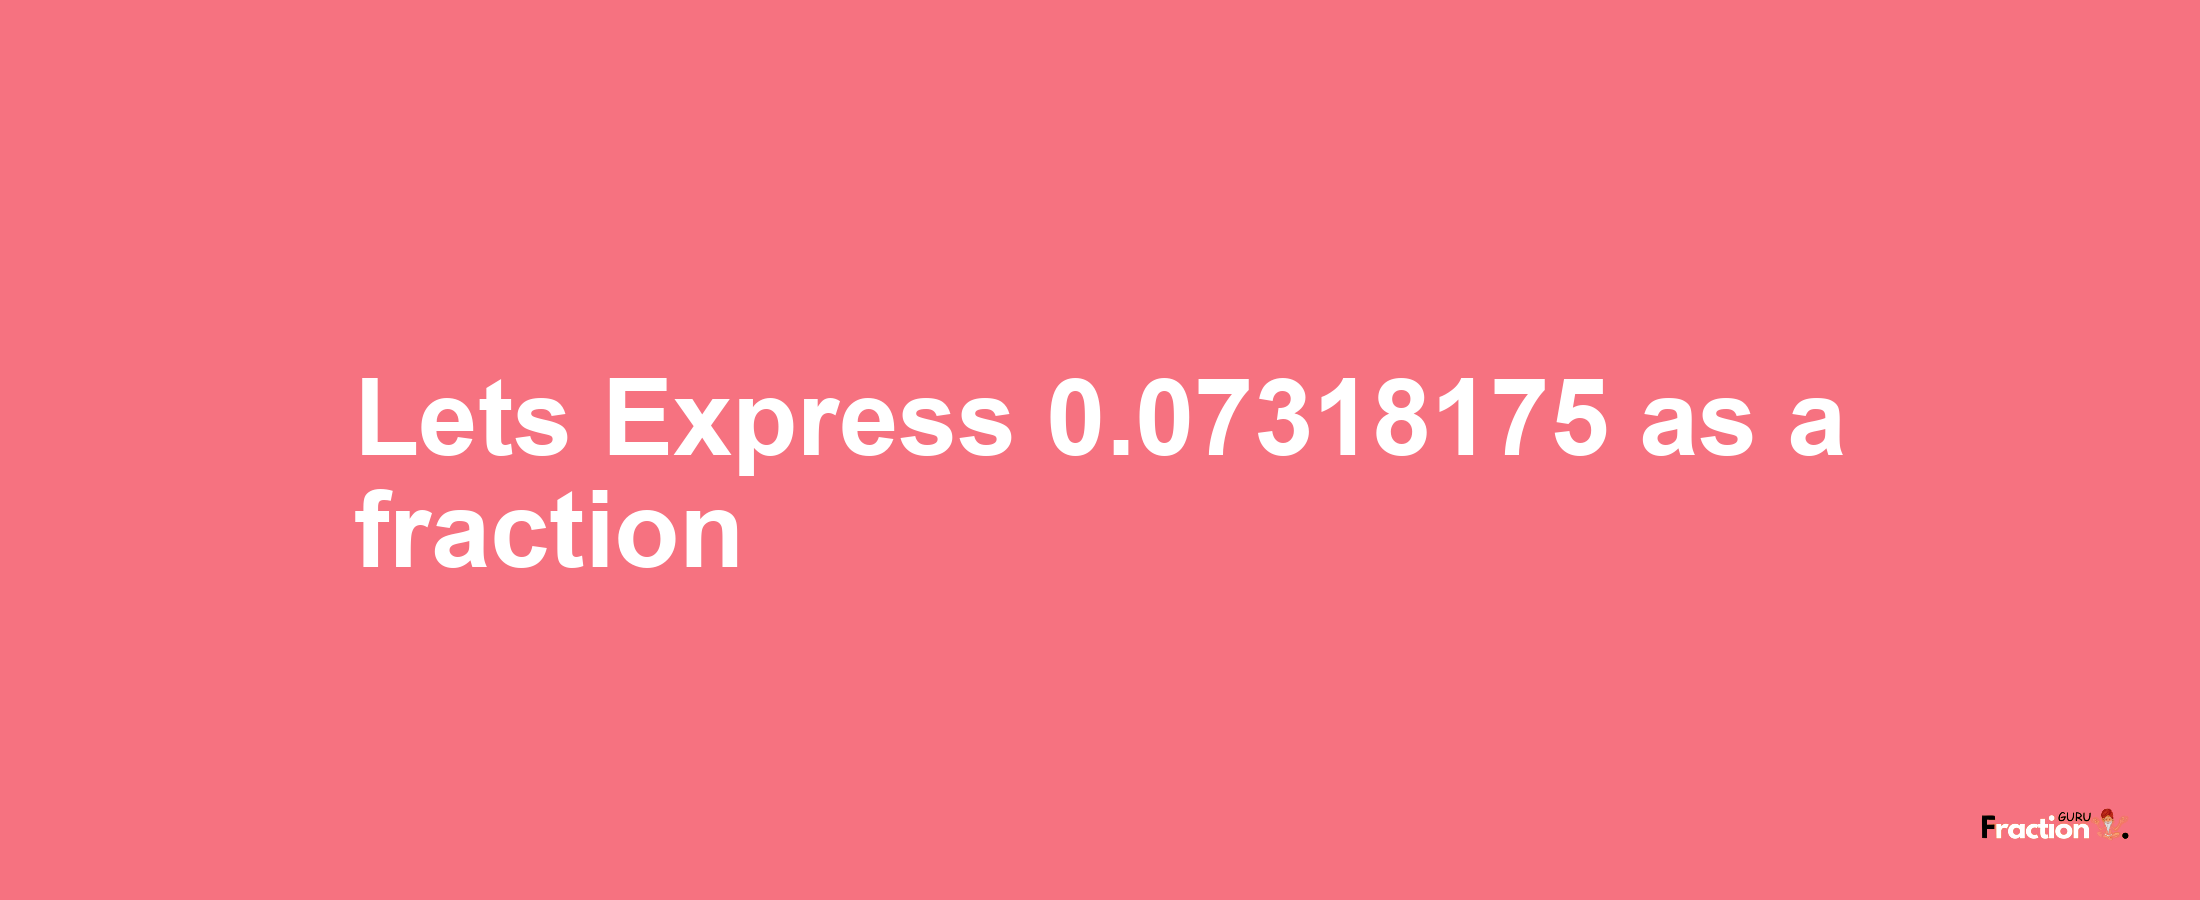 Lets Express 0.07318175 as afraction